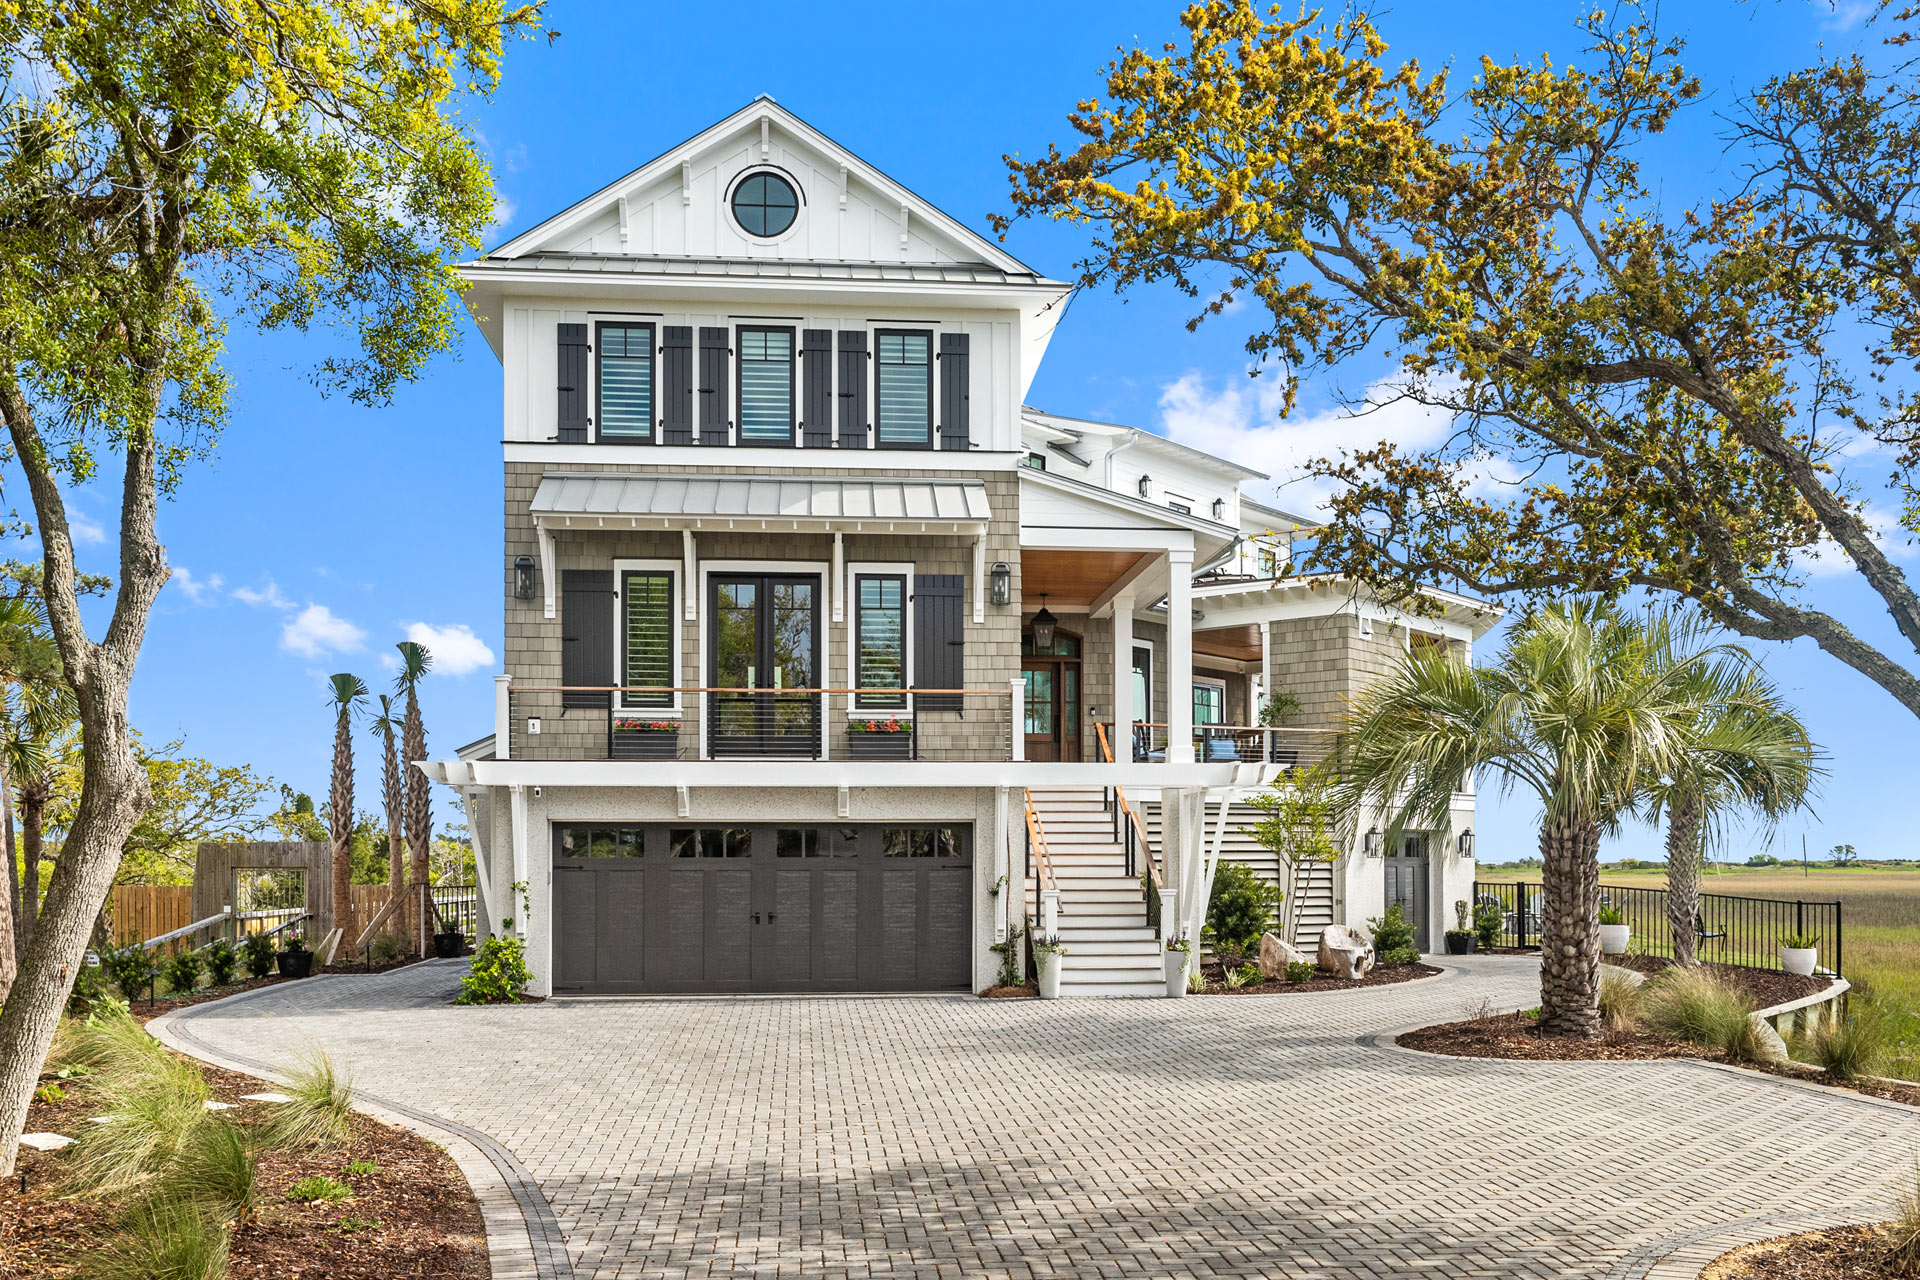 Front of new home coastal South Carolina home in Isle of Palms